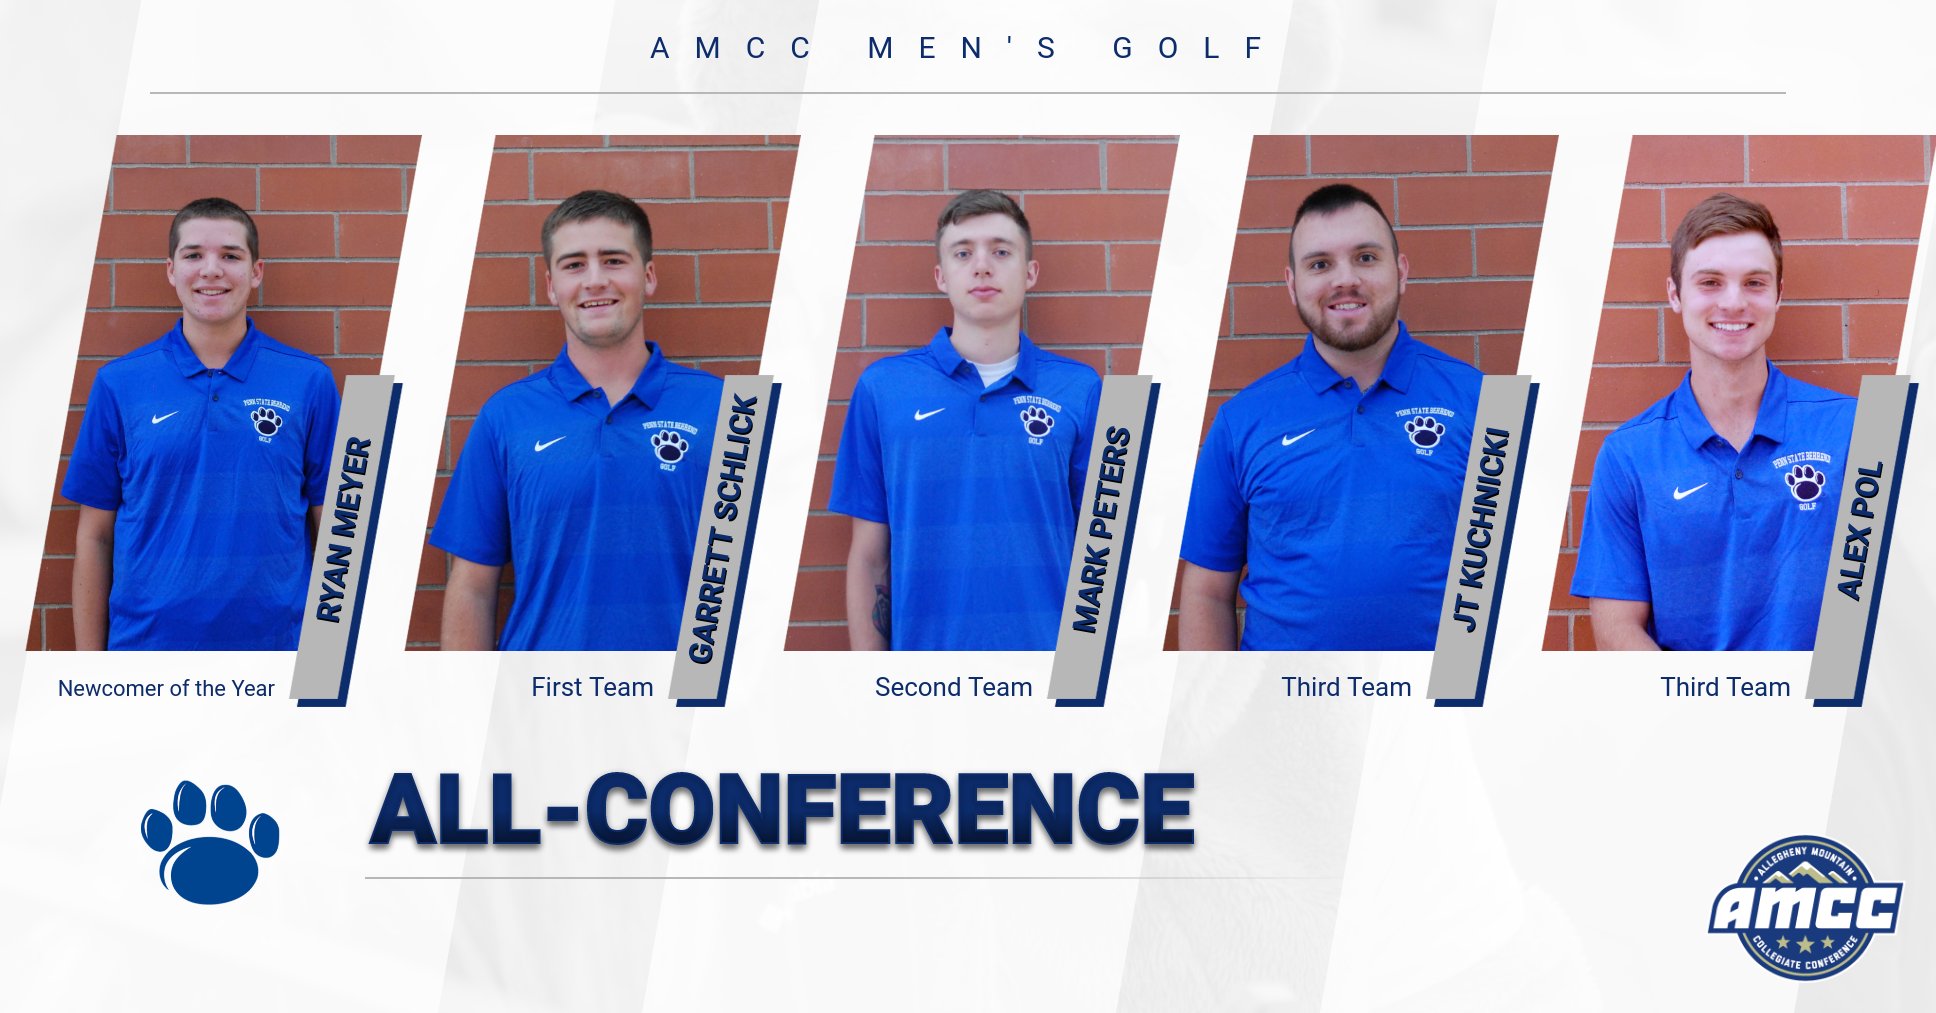 Meyer Named AMCC Newcomer of the Year